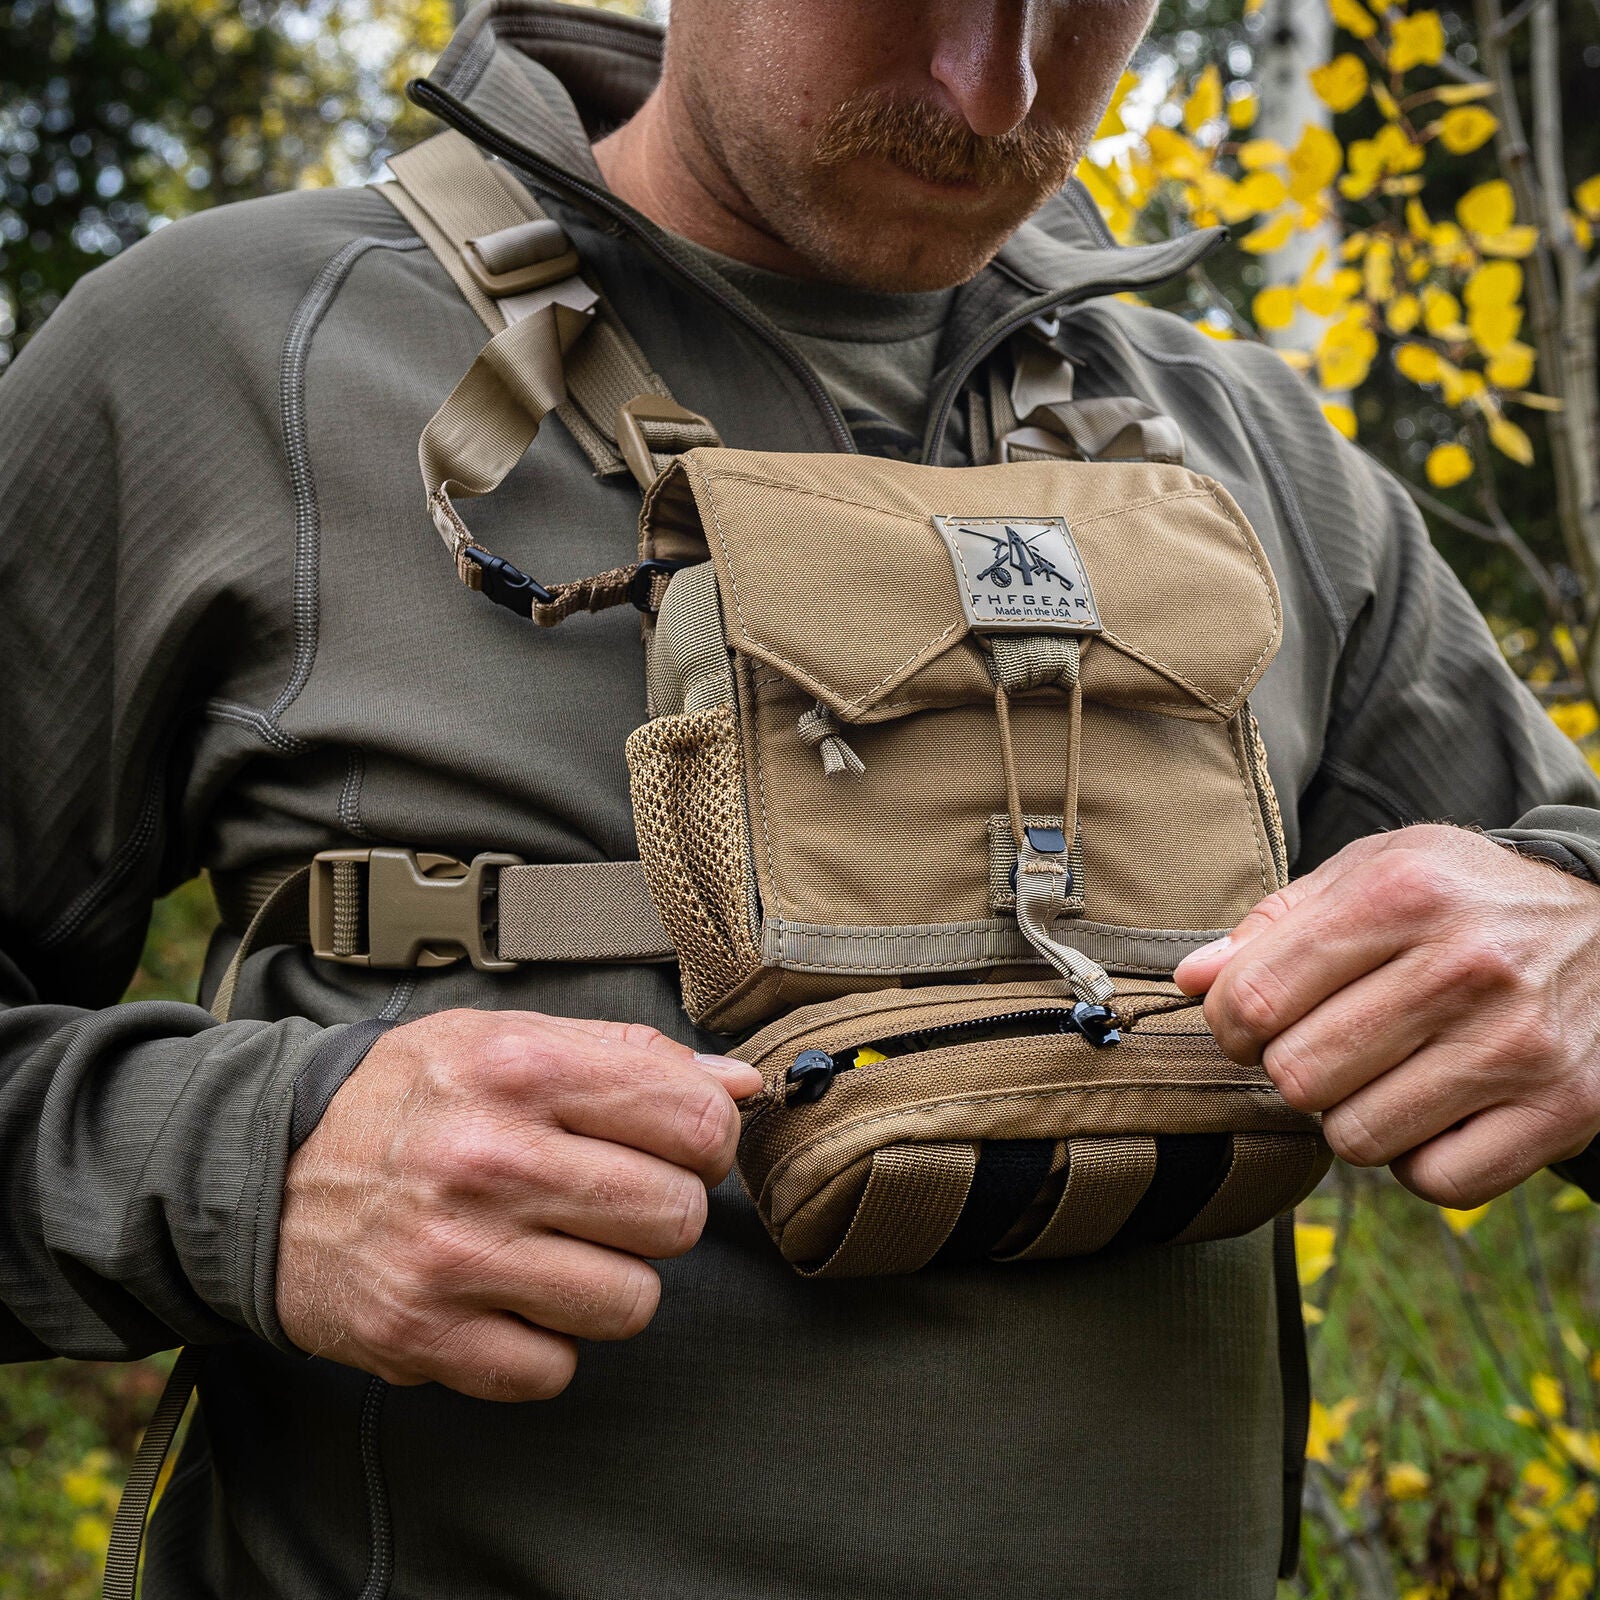 FHF Gear General Purpose Pouch with bino